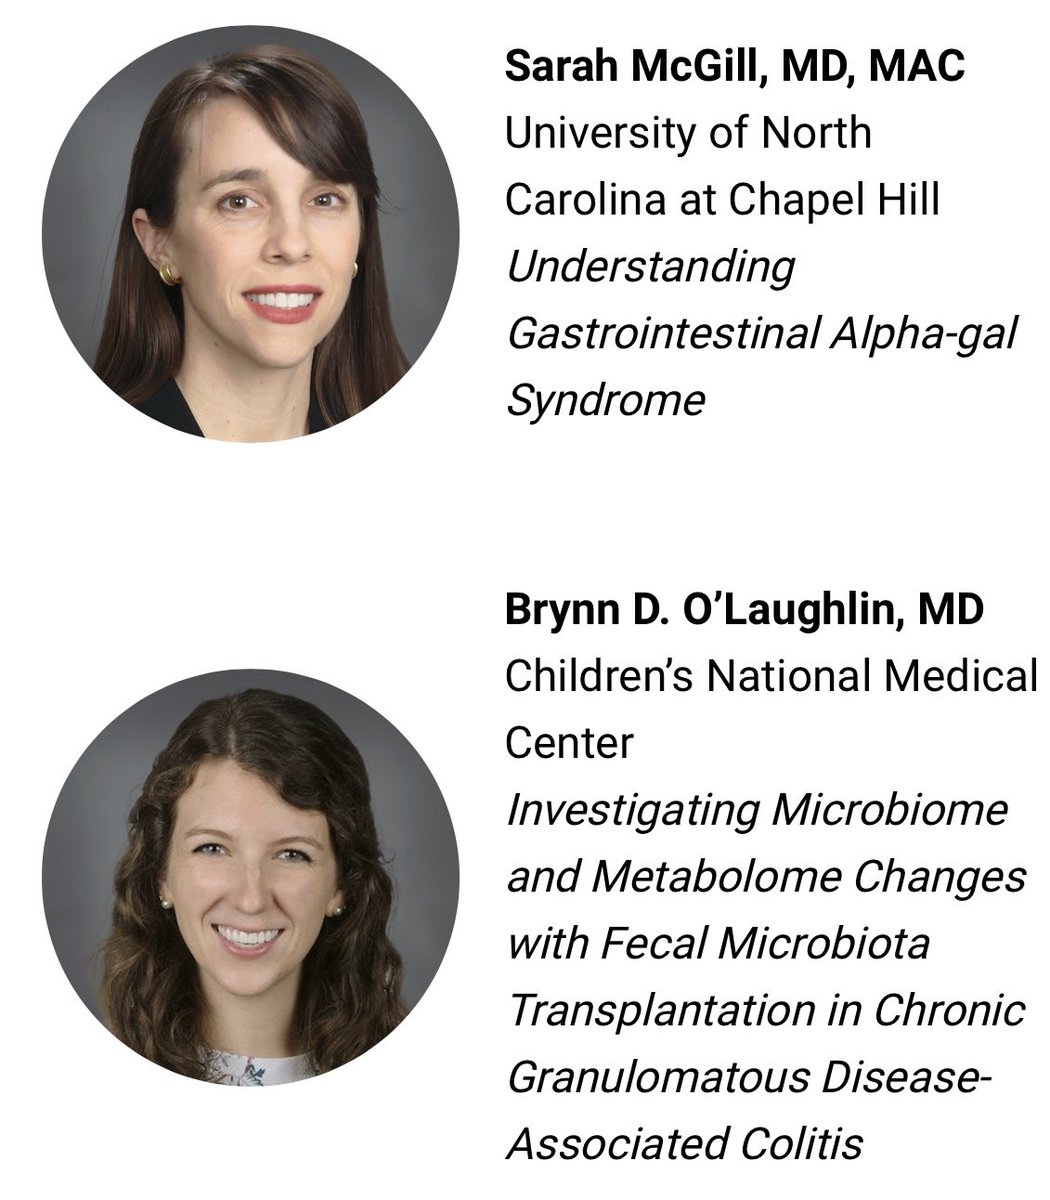 Very grateful to be starting our pilot study “Understanding Gastrointestinal Alpha-gal Syndrome”. 🙏🙏 to @ACG, its members, research committee & @NeenaSAbrahamMD for supporting work to study emerging GI illnesses. #AlphaGalSyndrome #AGS #IBS #GITwitter #tickbornediseases